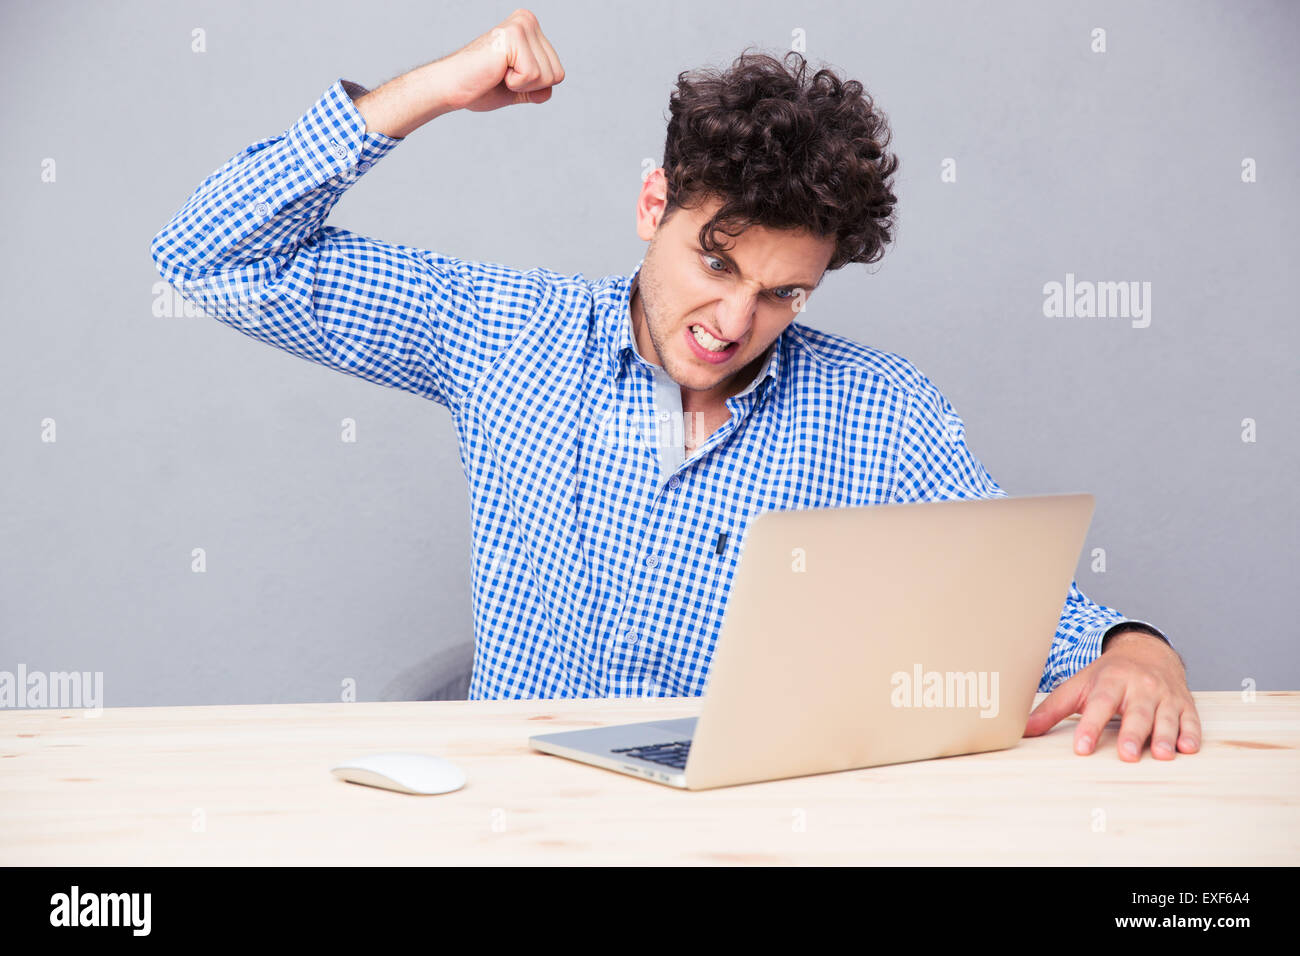 Angry man sitting at the table with laptop over gray background Stock Photo